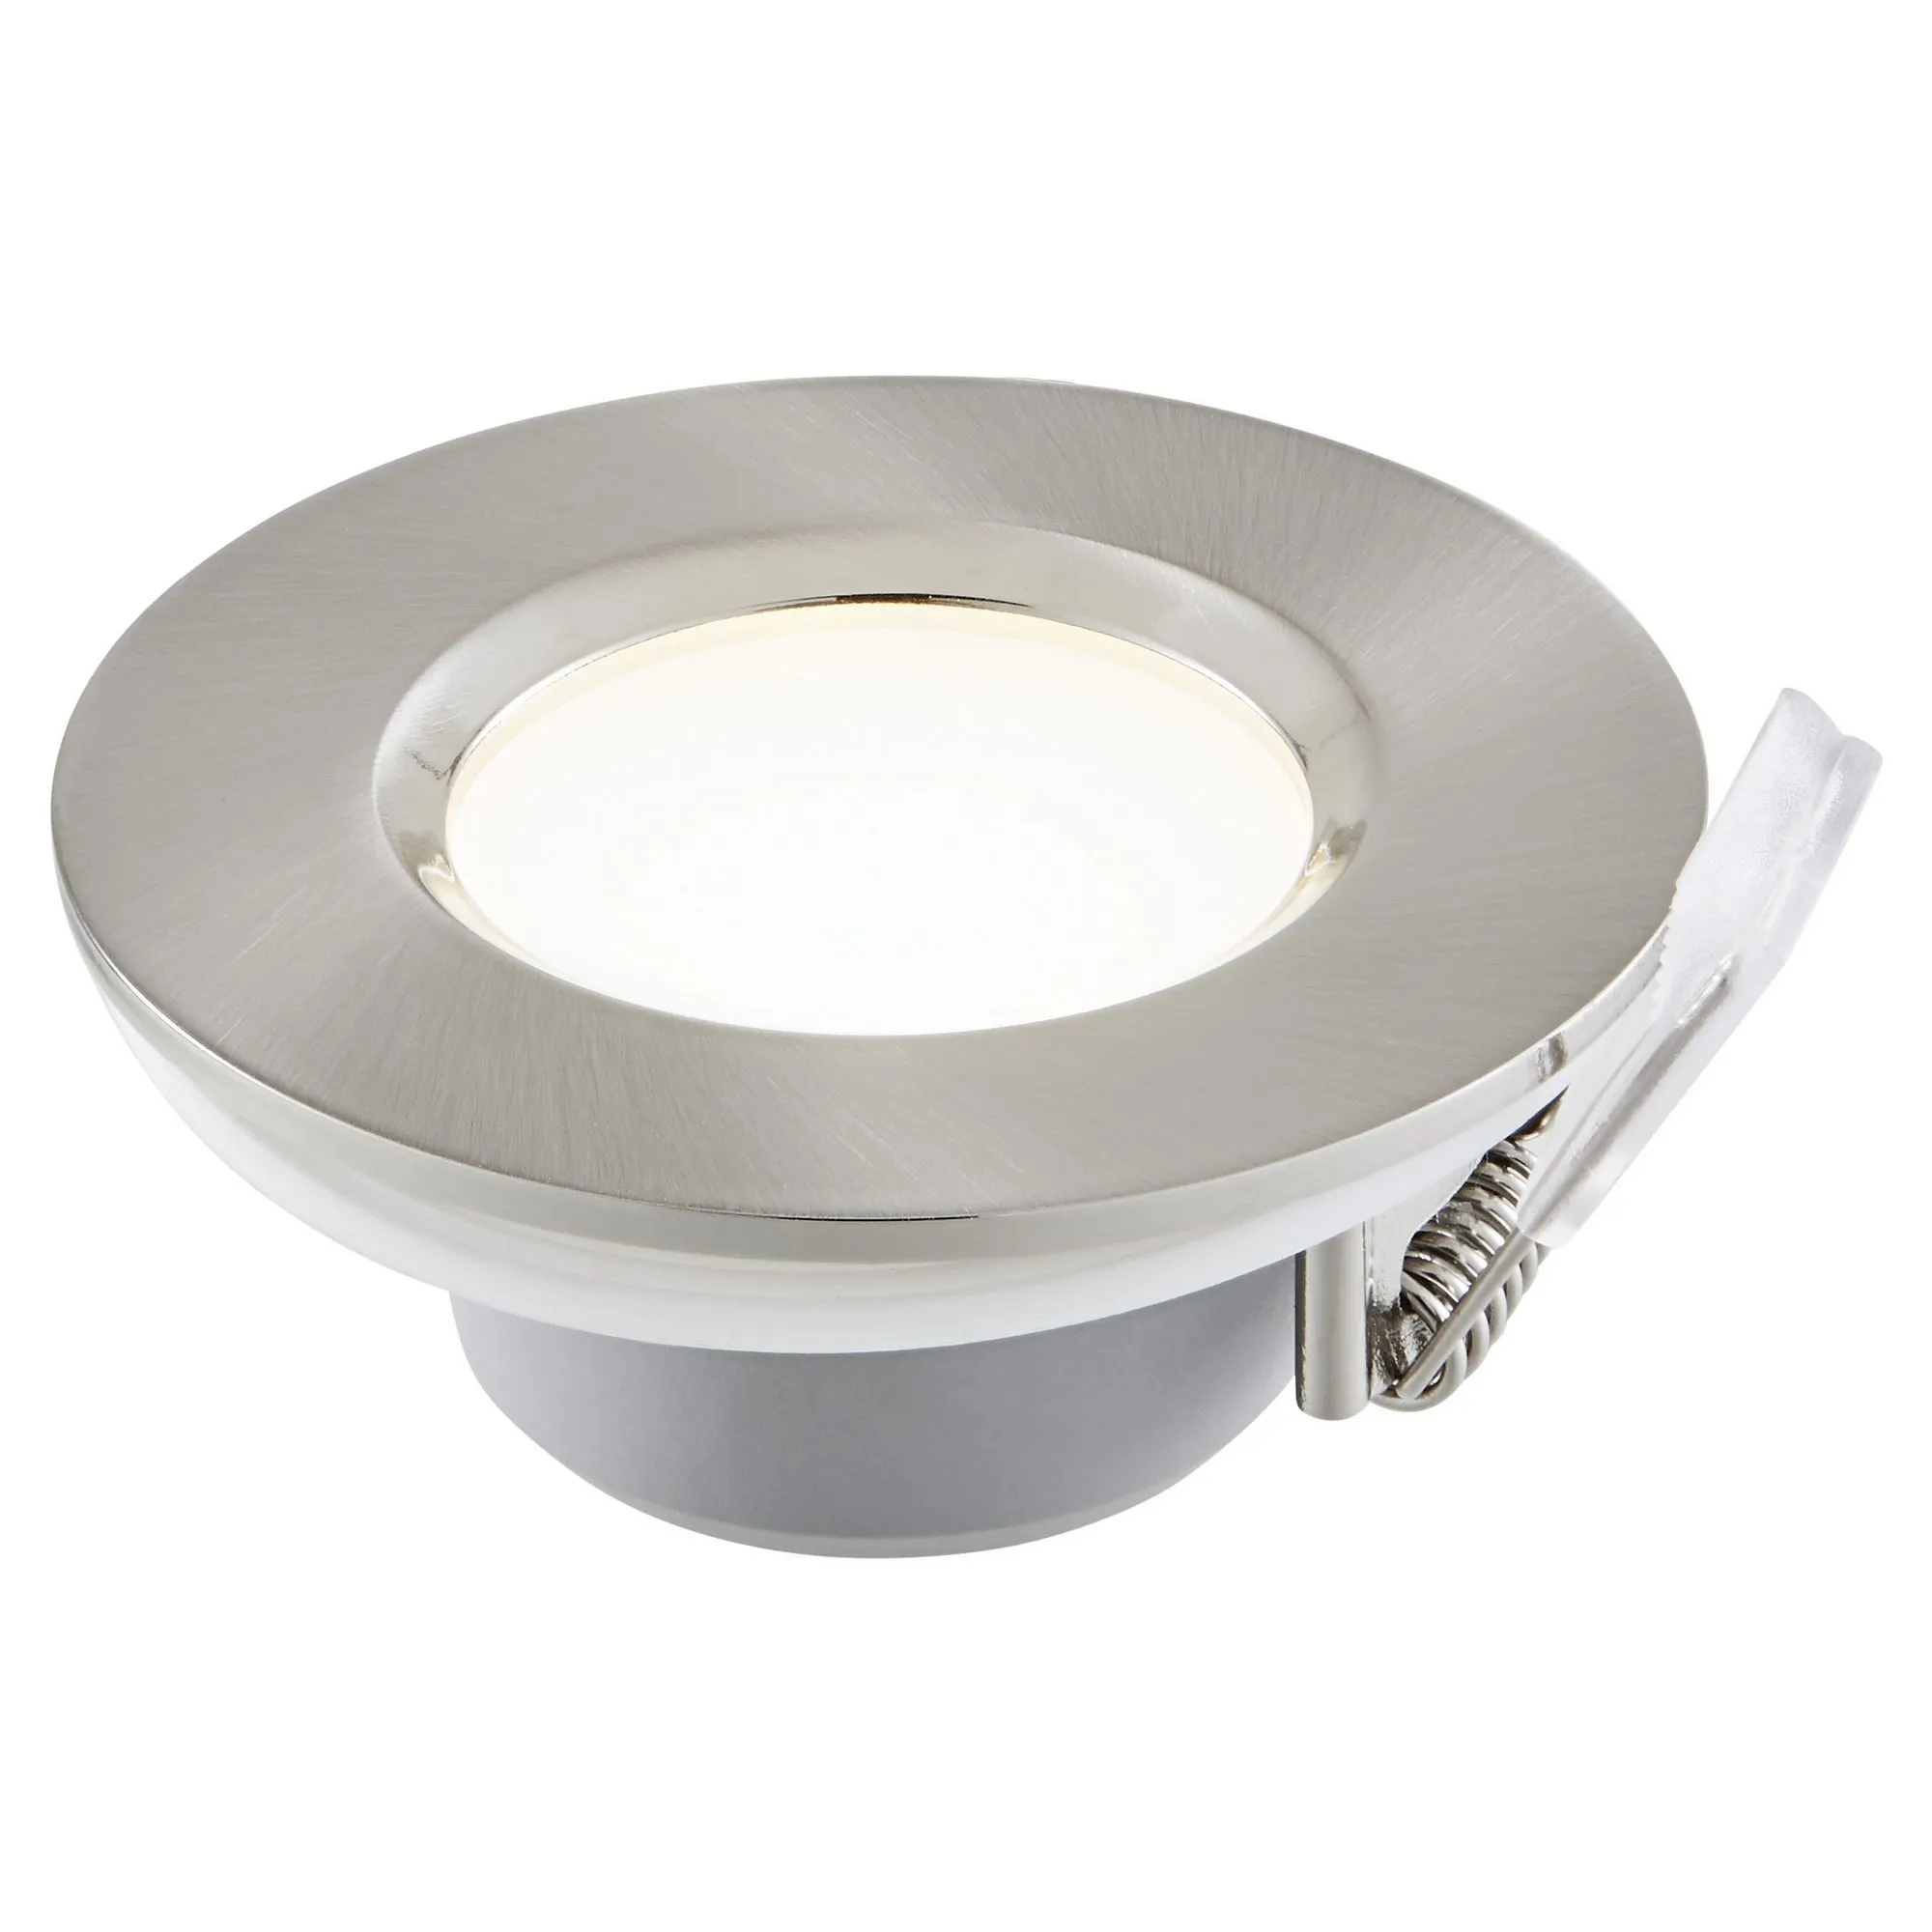 Blooma Boze Brushed Silver effect Mains-powered Neutral white LED Wall light